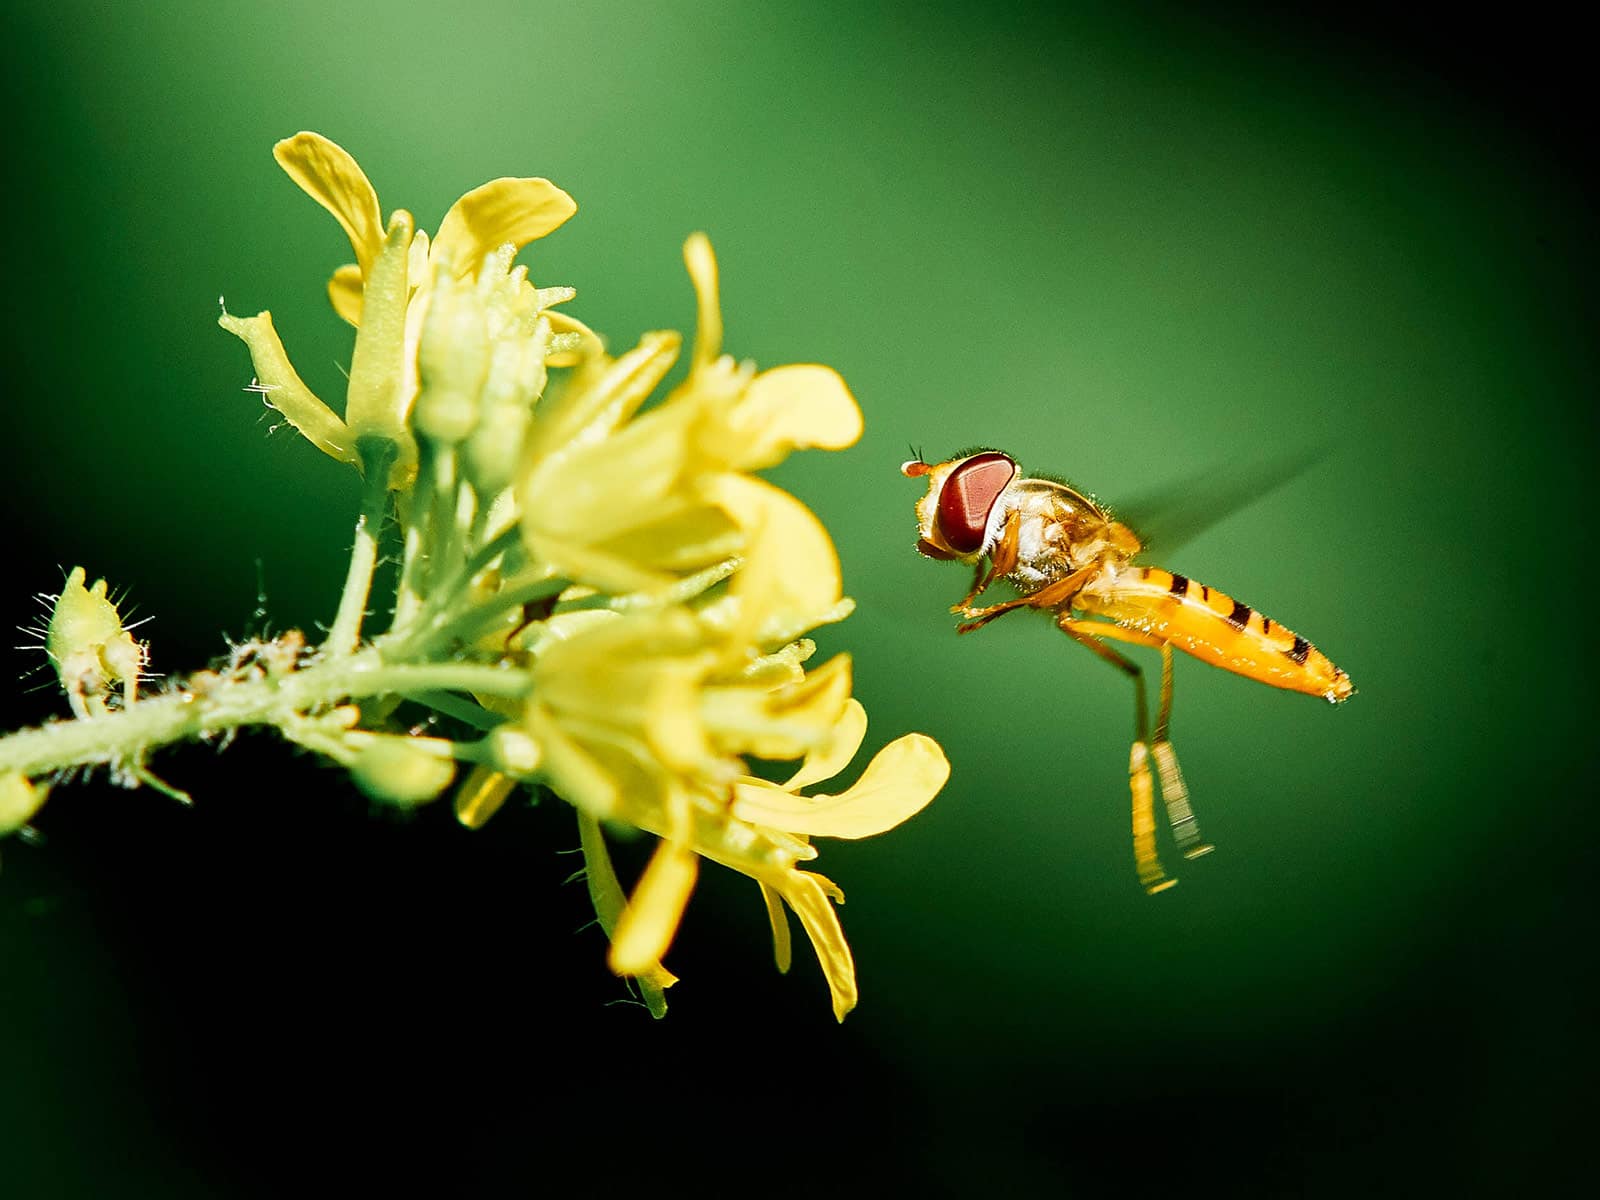 A hoverfly hovering in the air in front of a yellow flower head